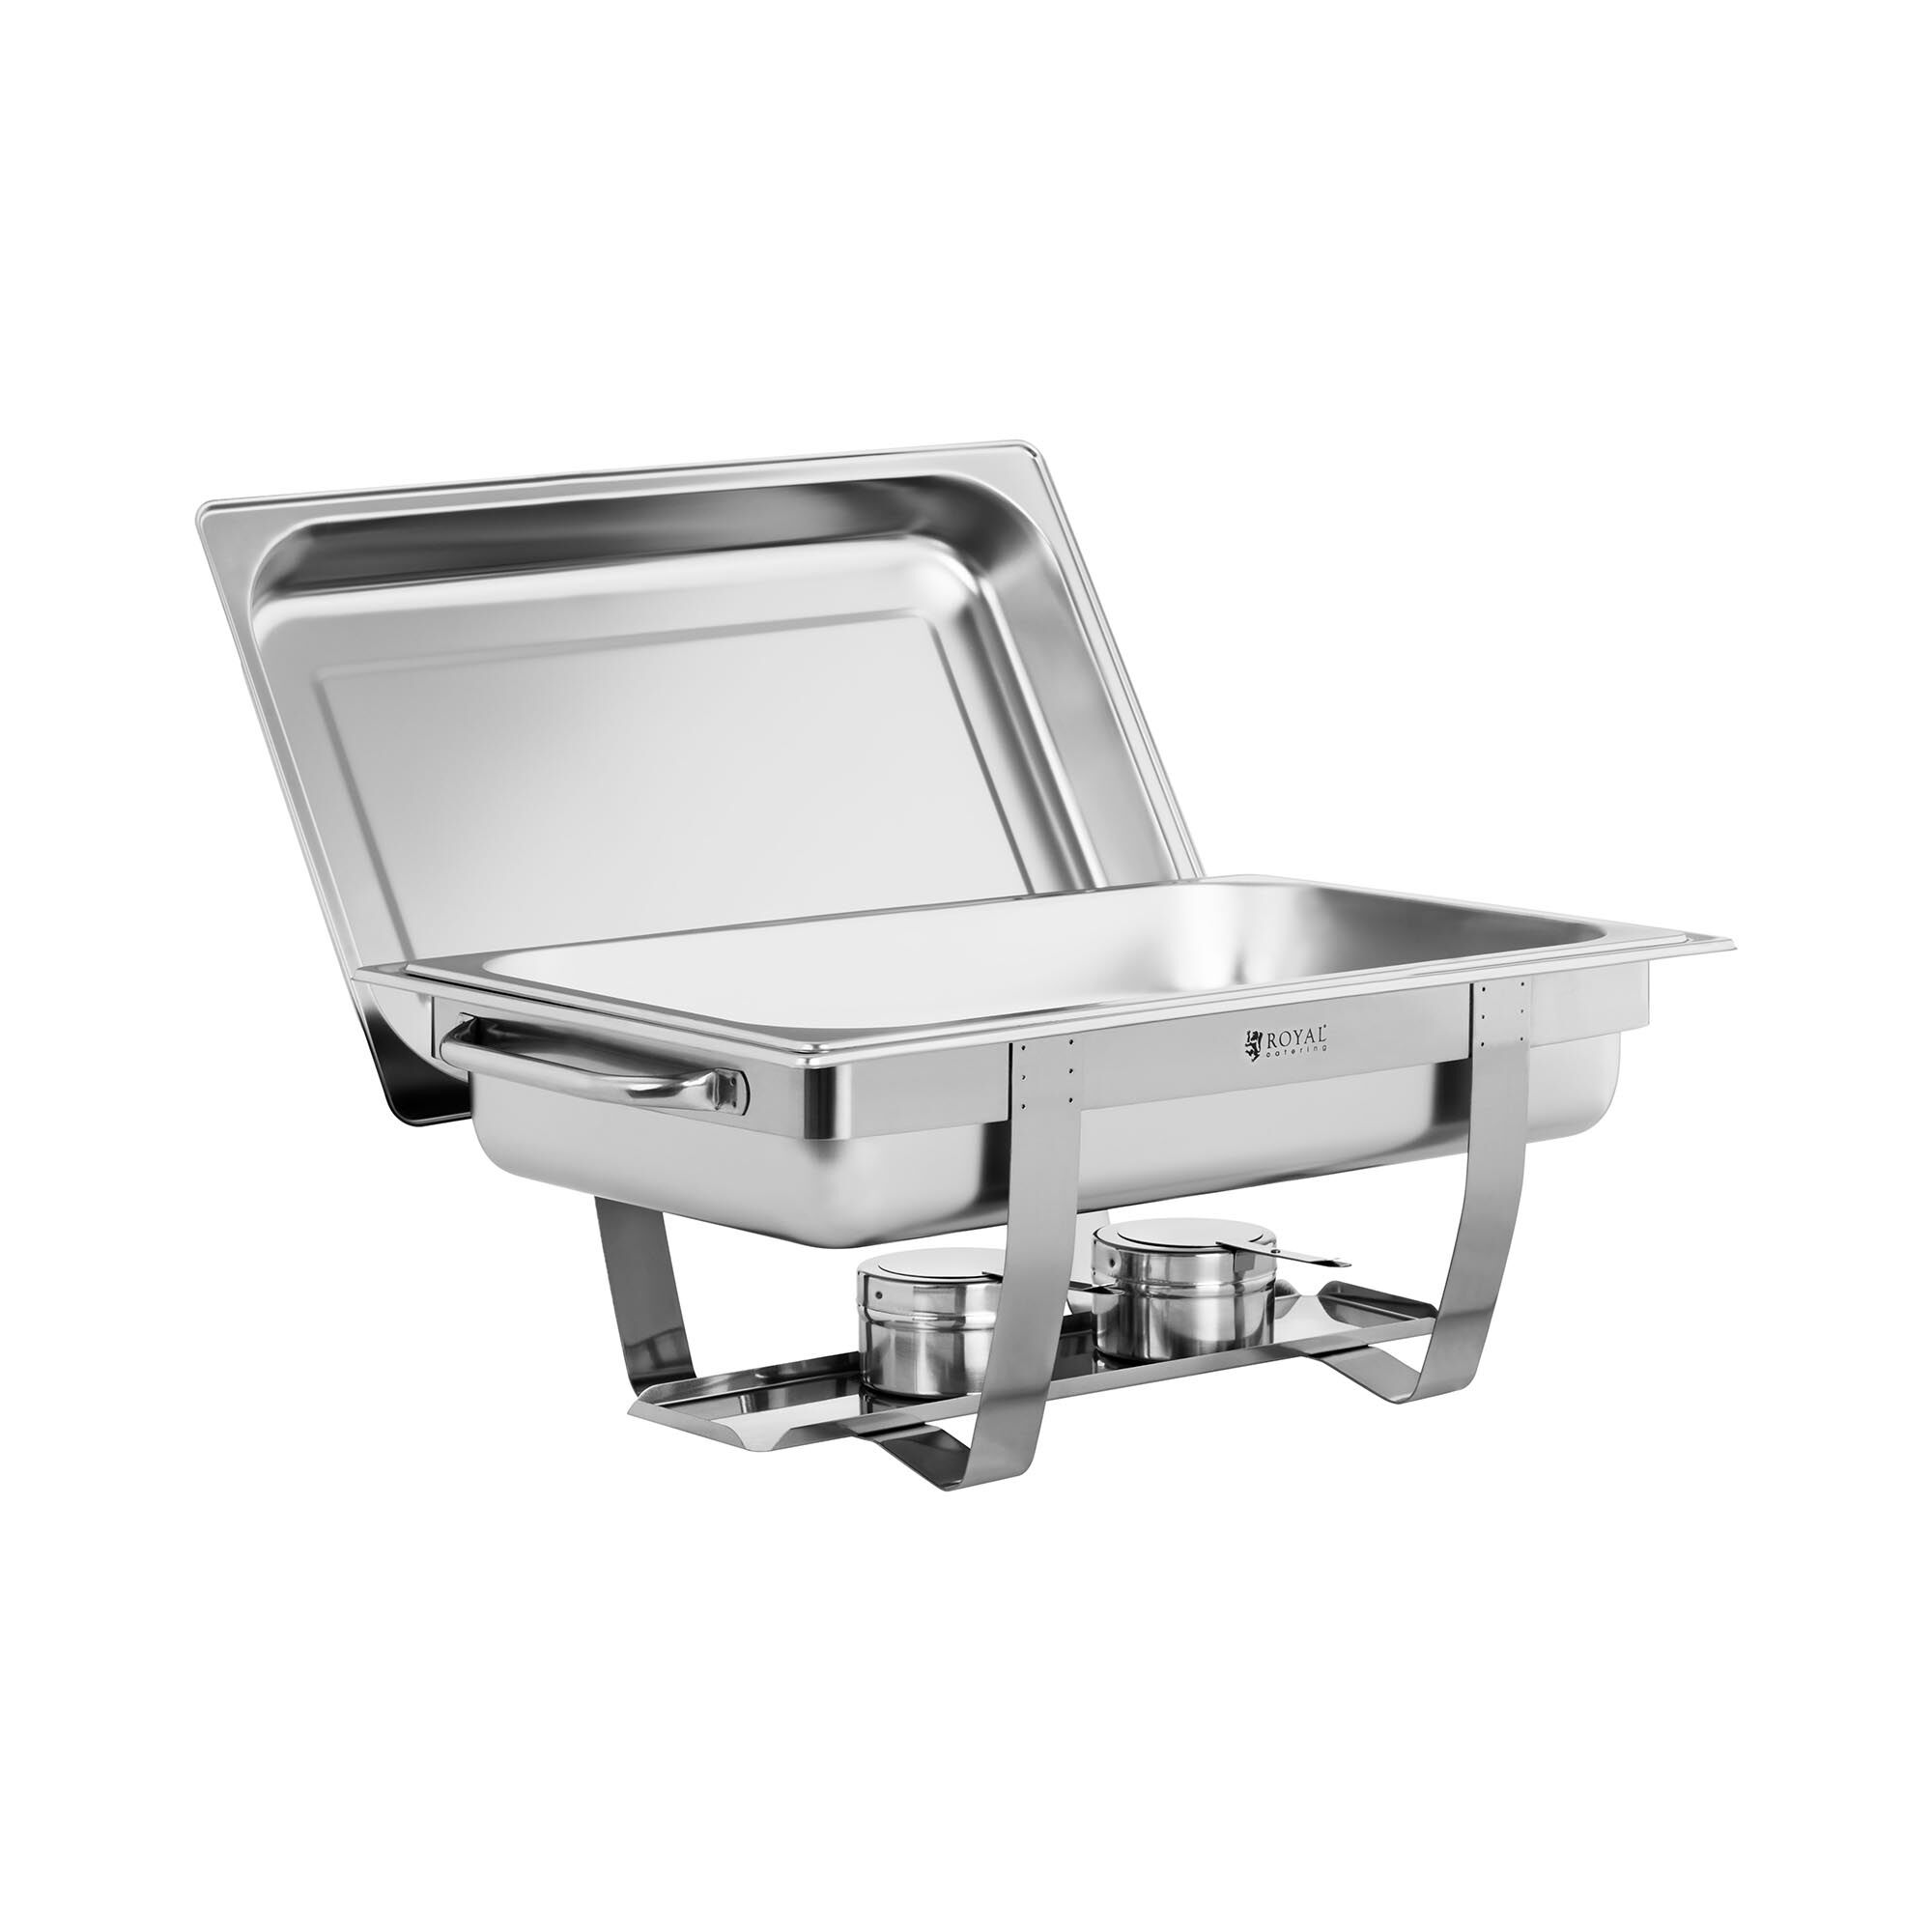 Royal Catering Chafing dish - GN 1/1 - 8 l - inkl. 2 brændere